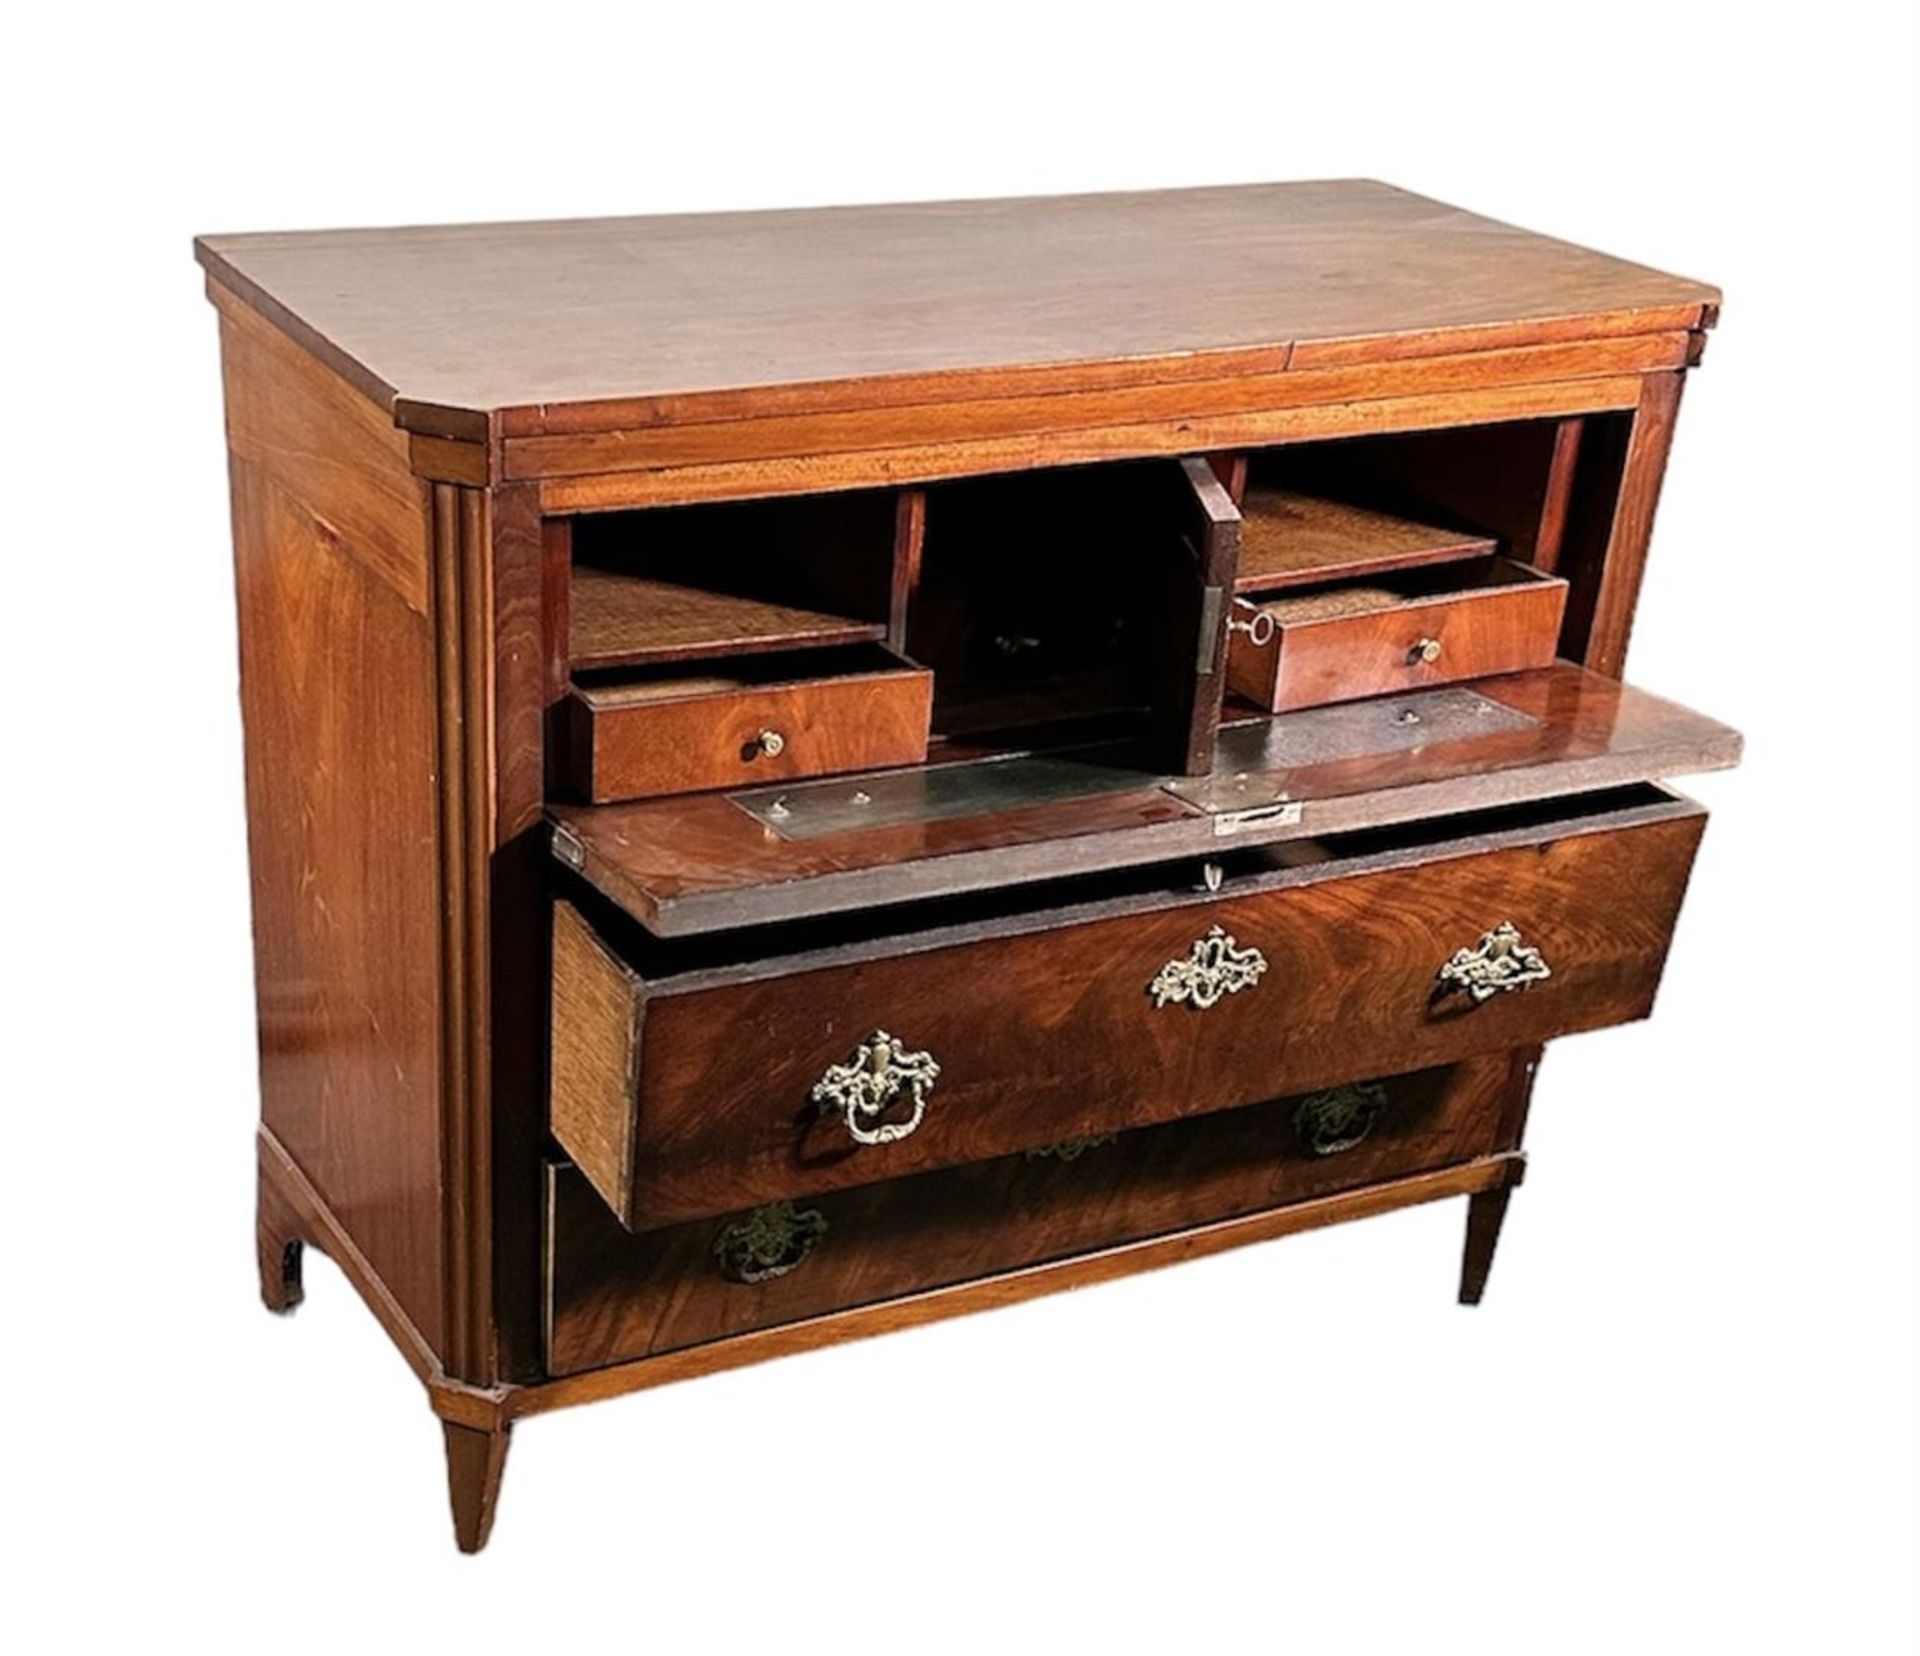 A mahogany three-drawer chest of drawers. The top drawer tilts and becomes a disc table. ca. 1780.
8